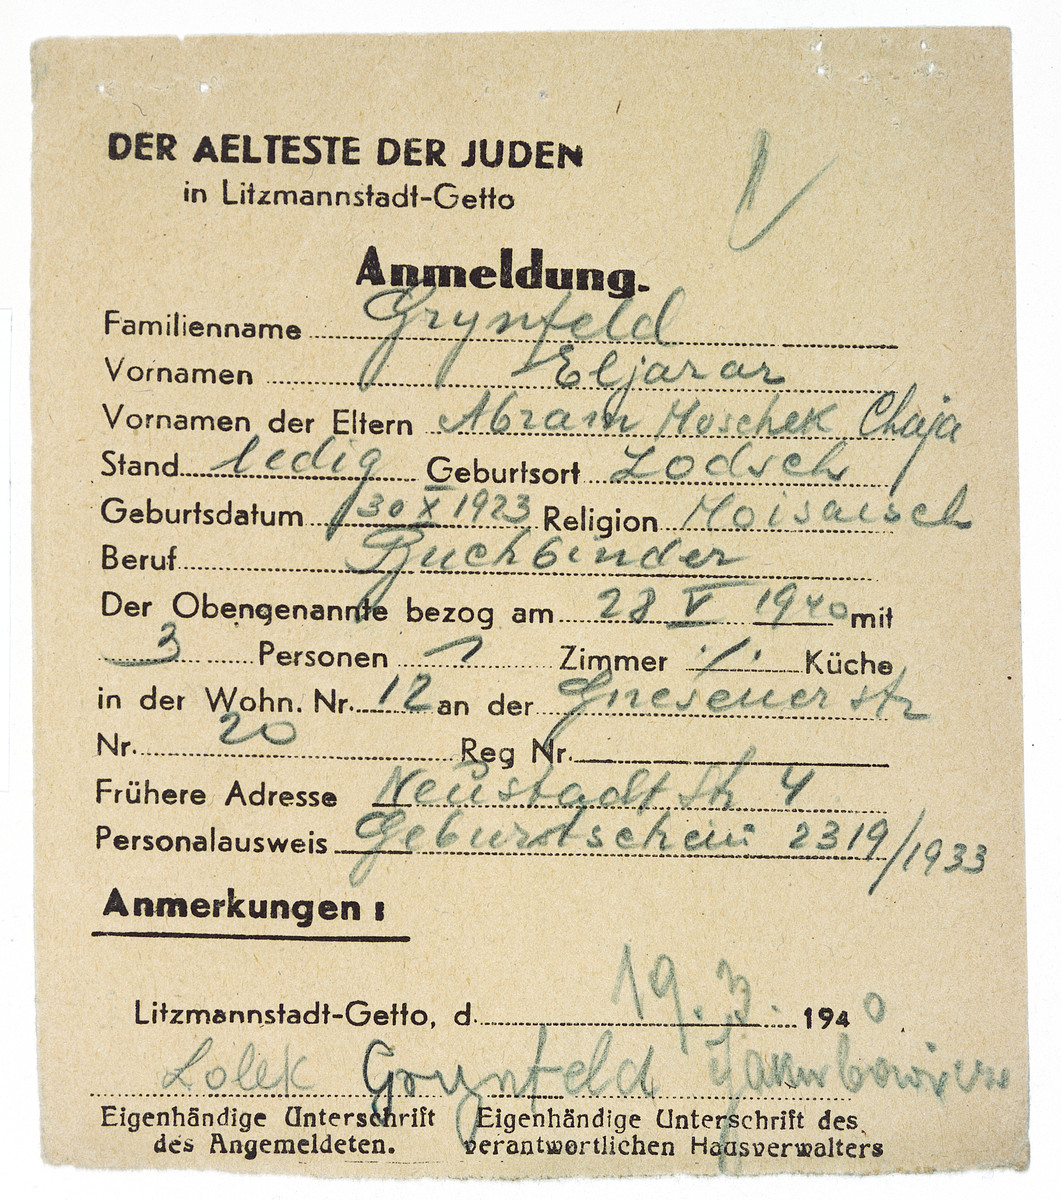 Registration card issued by the Jewish Council in the Lodz ghetto to Eliezer Grynfeld.

It states that Eliezer Grynfeld, son of Abram Moszek and Chaja, who was born on October 30, 1923 in Lodz has been assigned to reside as of May 28, 1940, with 3 people in 1 room at 20 Gneisen Street (Gnieznienska) in the ghetto.  This registration was issued on March 19, 1940; signed by Eliezer Grynfeld and Jakubowicz.